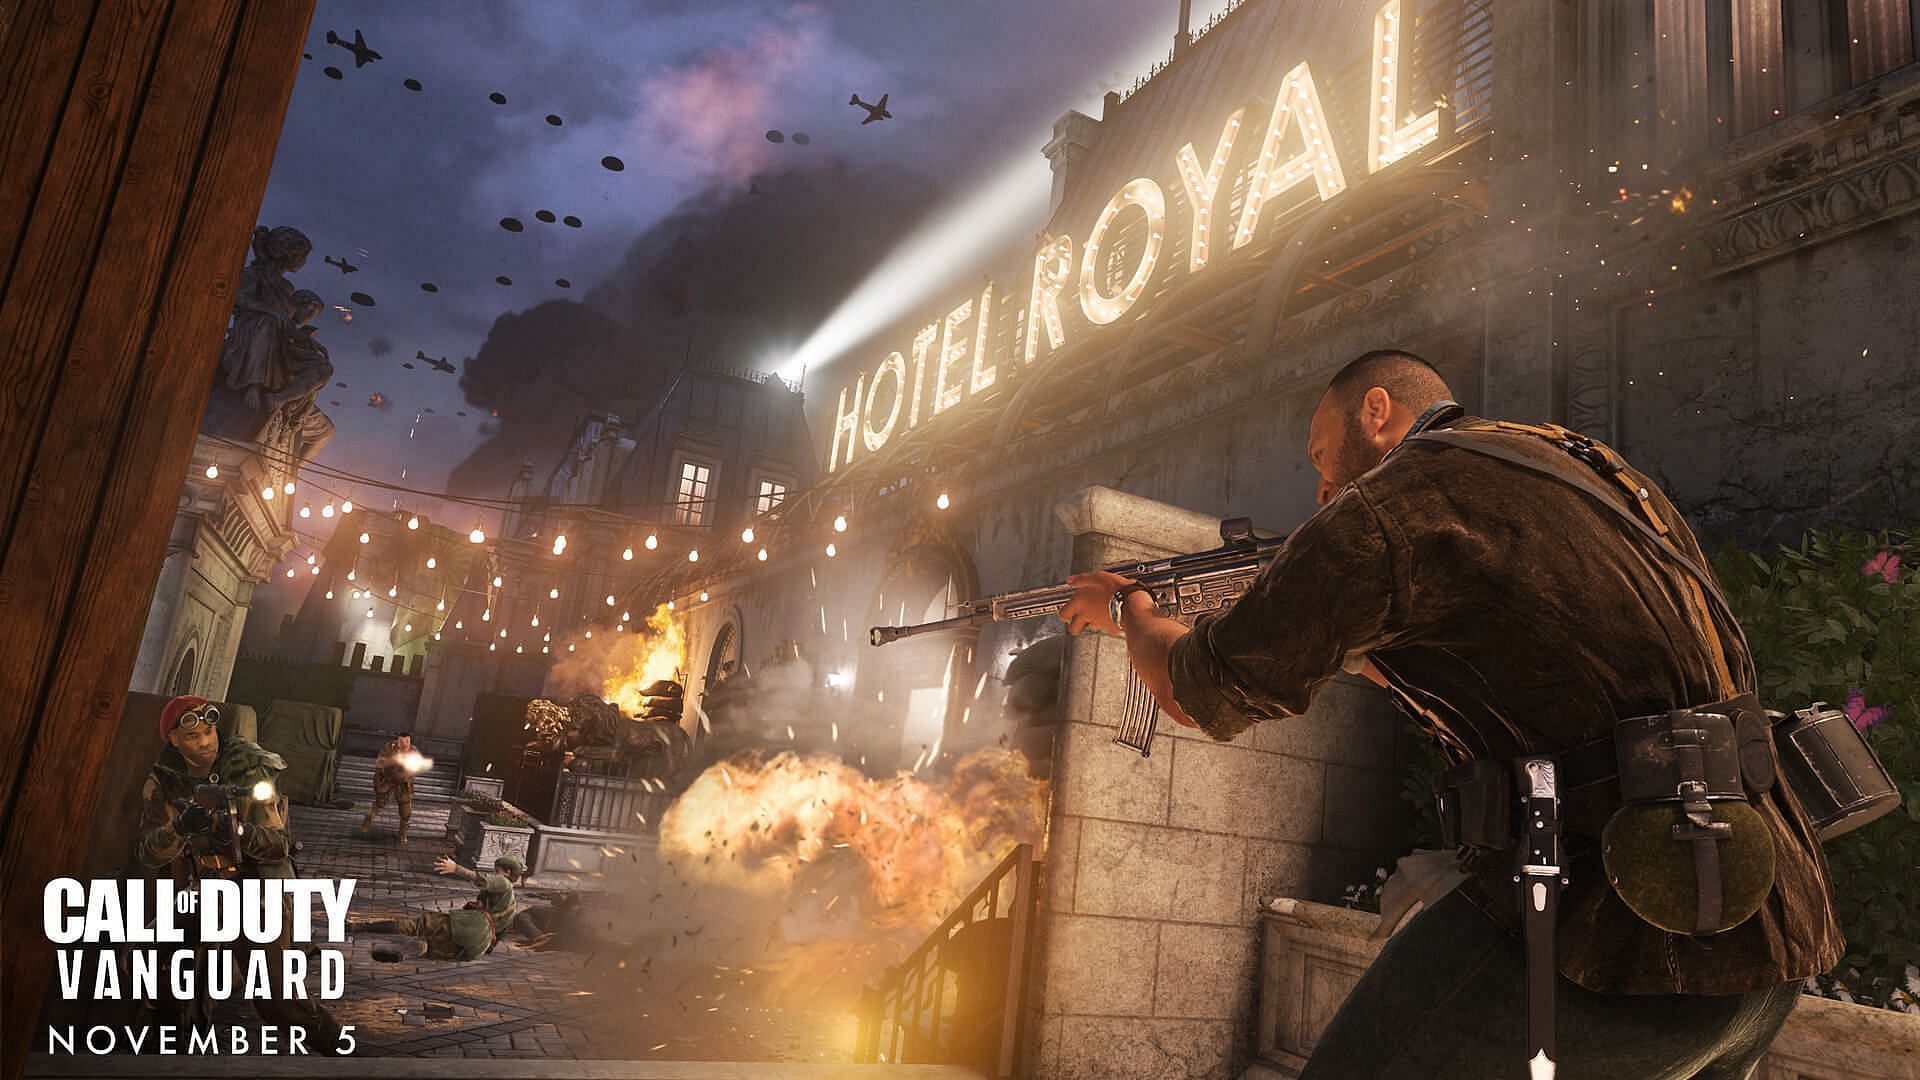 Call of Duty: Vanguard is out now for players to enjoy (Image by Activision)